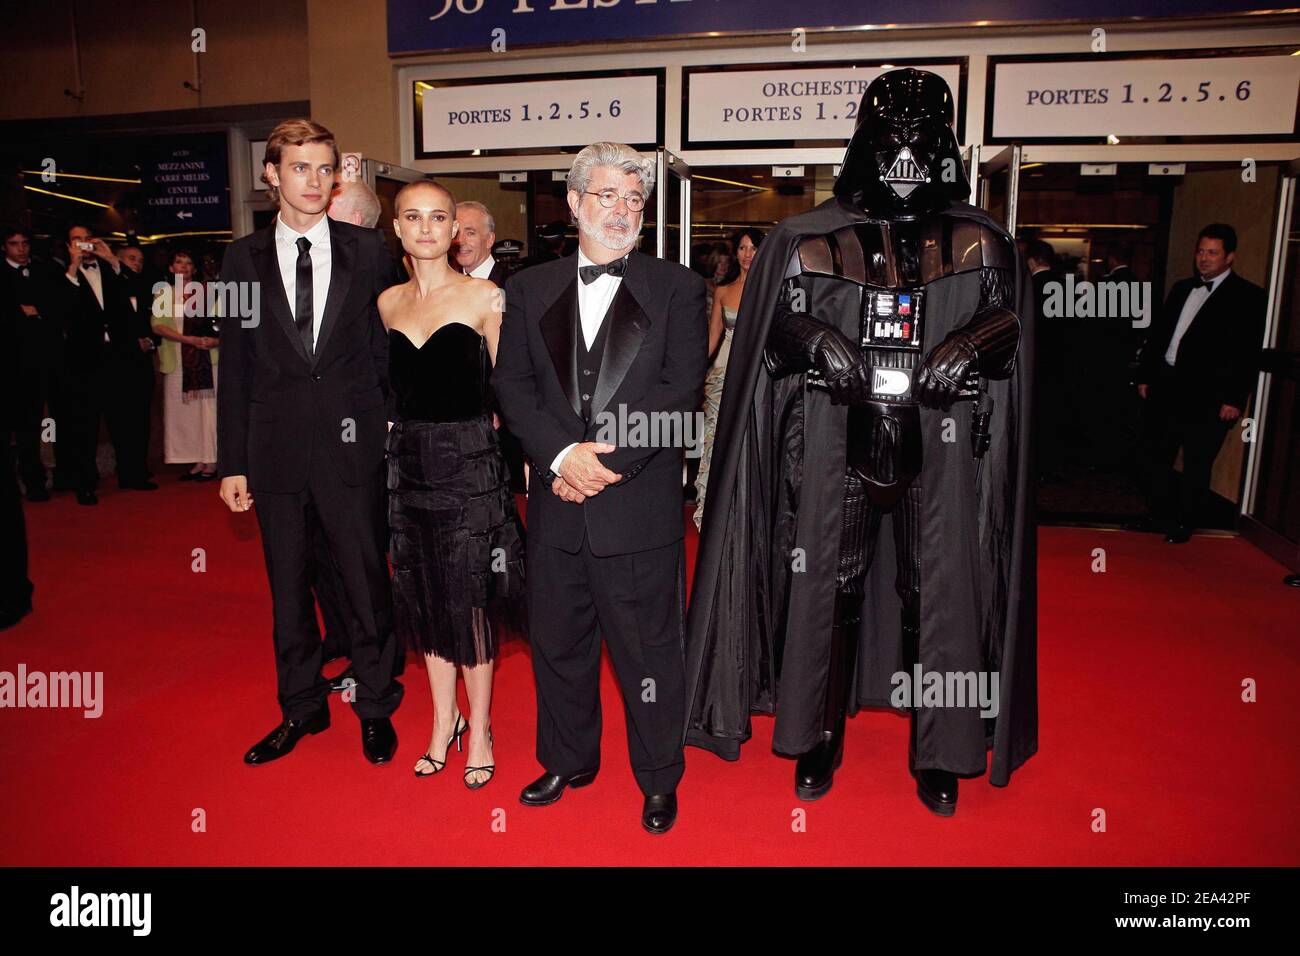 Cast members Hayden Christensen and Natalie Portman with director George Lucas and character Darth Vader at the end of George Lucas film 'Star Wars Episode 3 Revenge of the Sith' World Premiere presented out of competition at the 58th Cannes Film Festival in Cannes, France on May 15, 2005. Photo by Hahn-Nebinger-Klein/ABACA Stock Photo